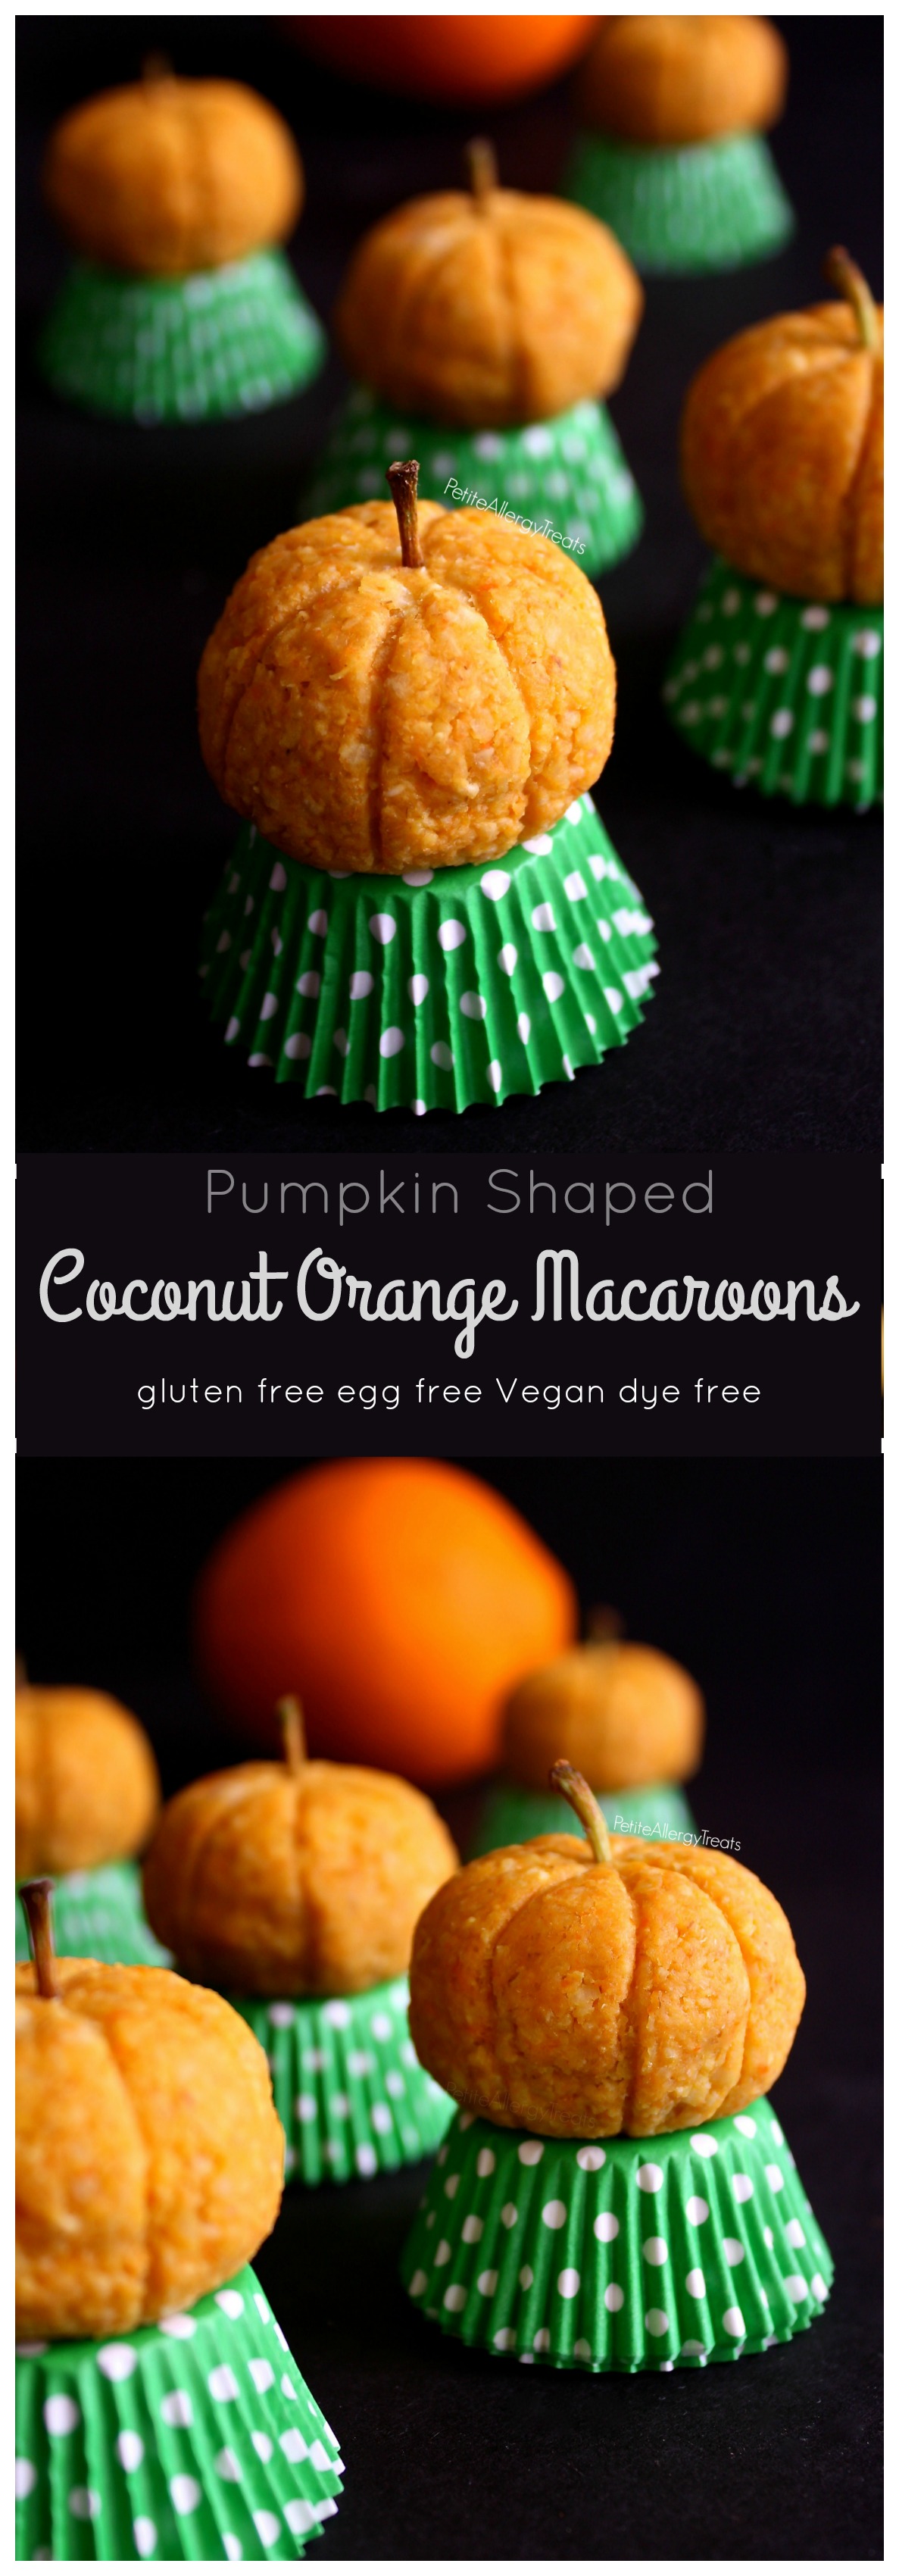 Coconut Orange Macaroons (gluten free vegan dye free) These cute pumpkins are really orange flavored coconut macaroons! Naturally colored and allergy friendly.